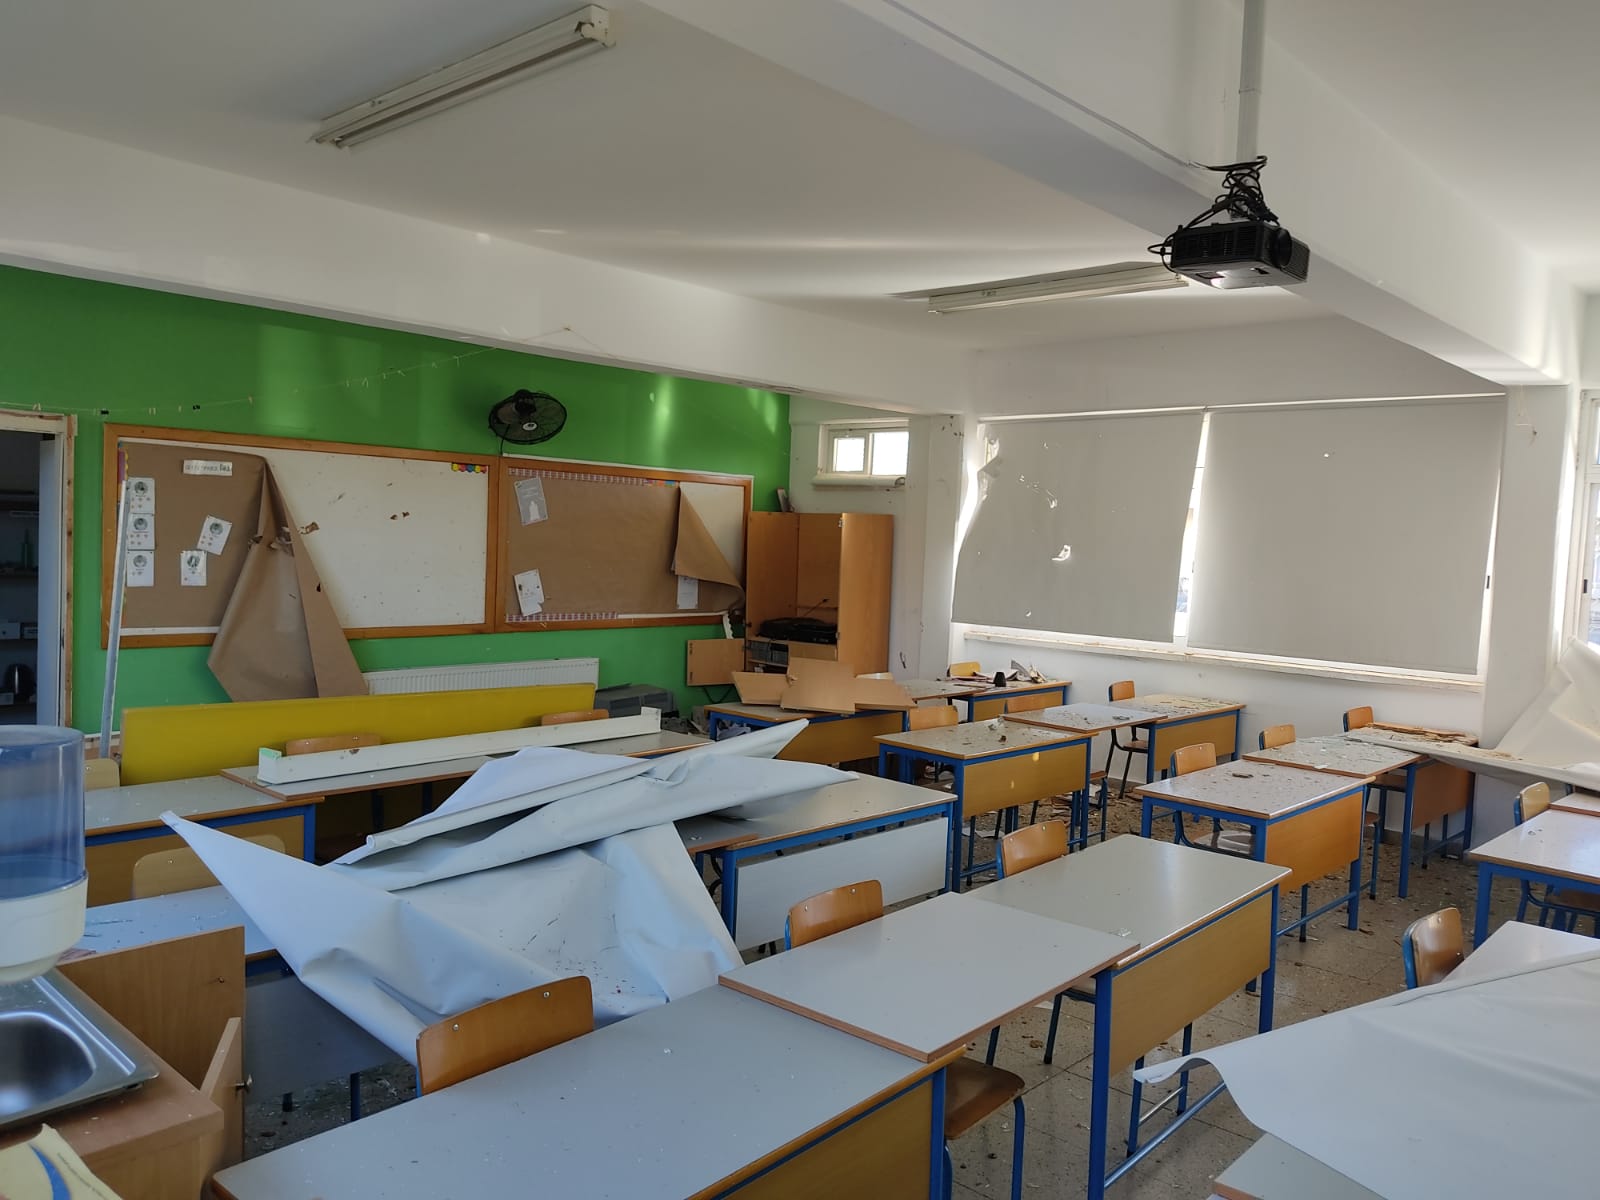 Cyprus: Bomb by anti-vaccinators at a school in Limassol - Fourals